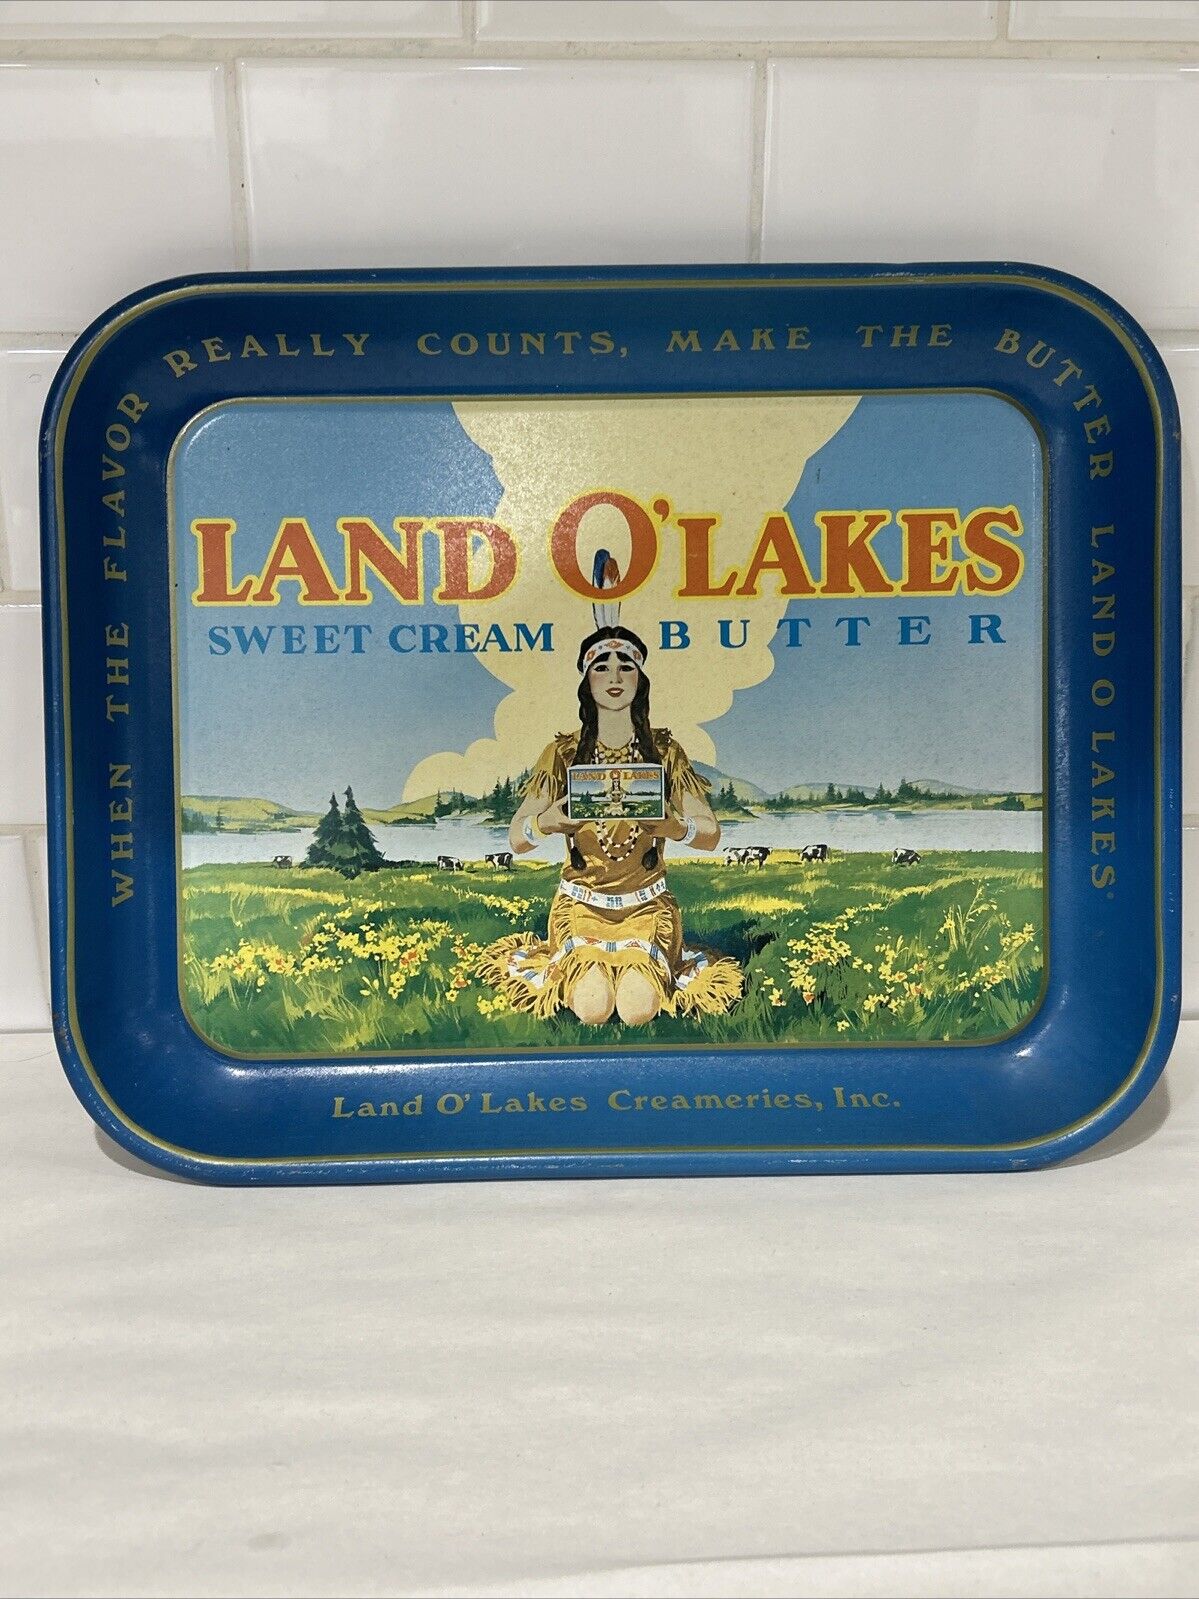 Land O’Lakes Sweet Cream Butter Tray